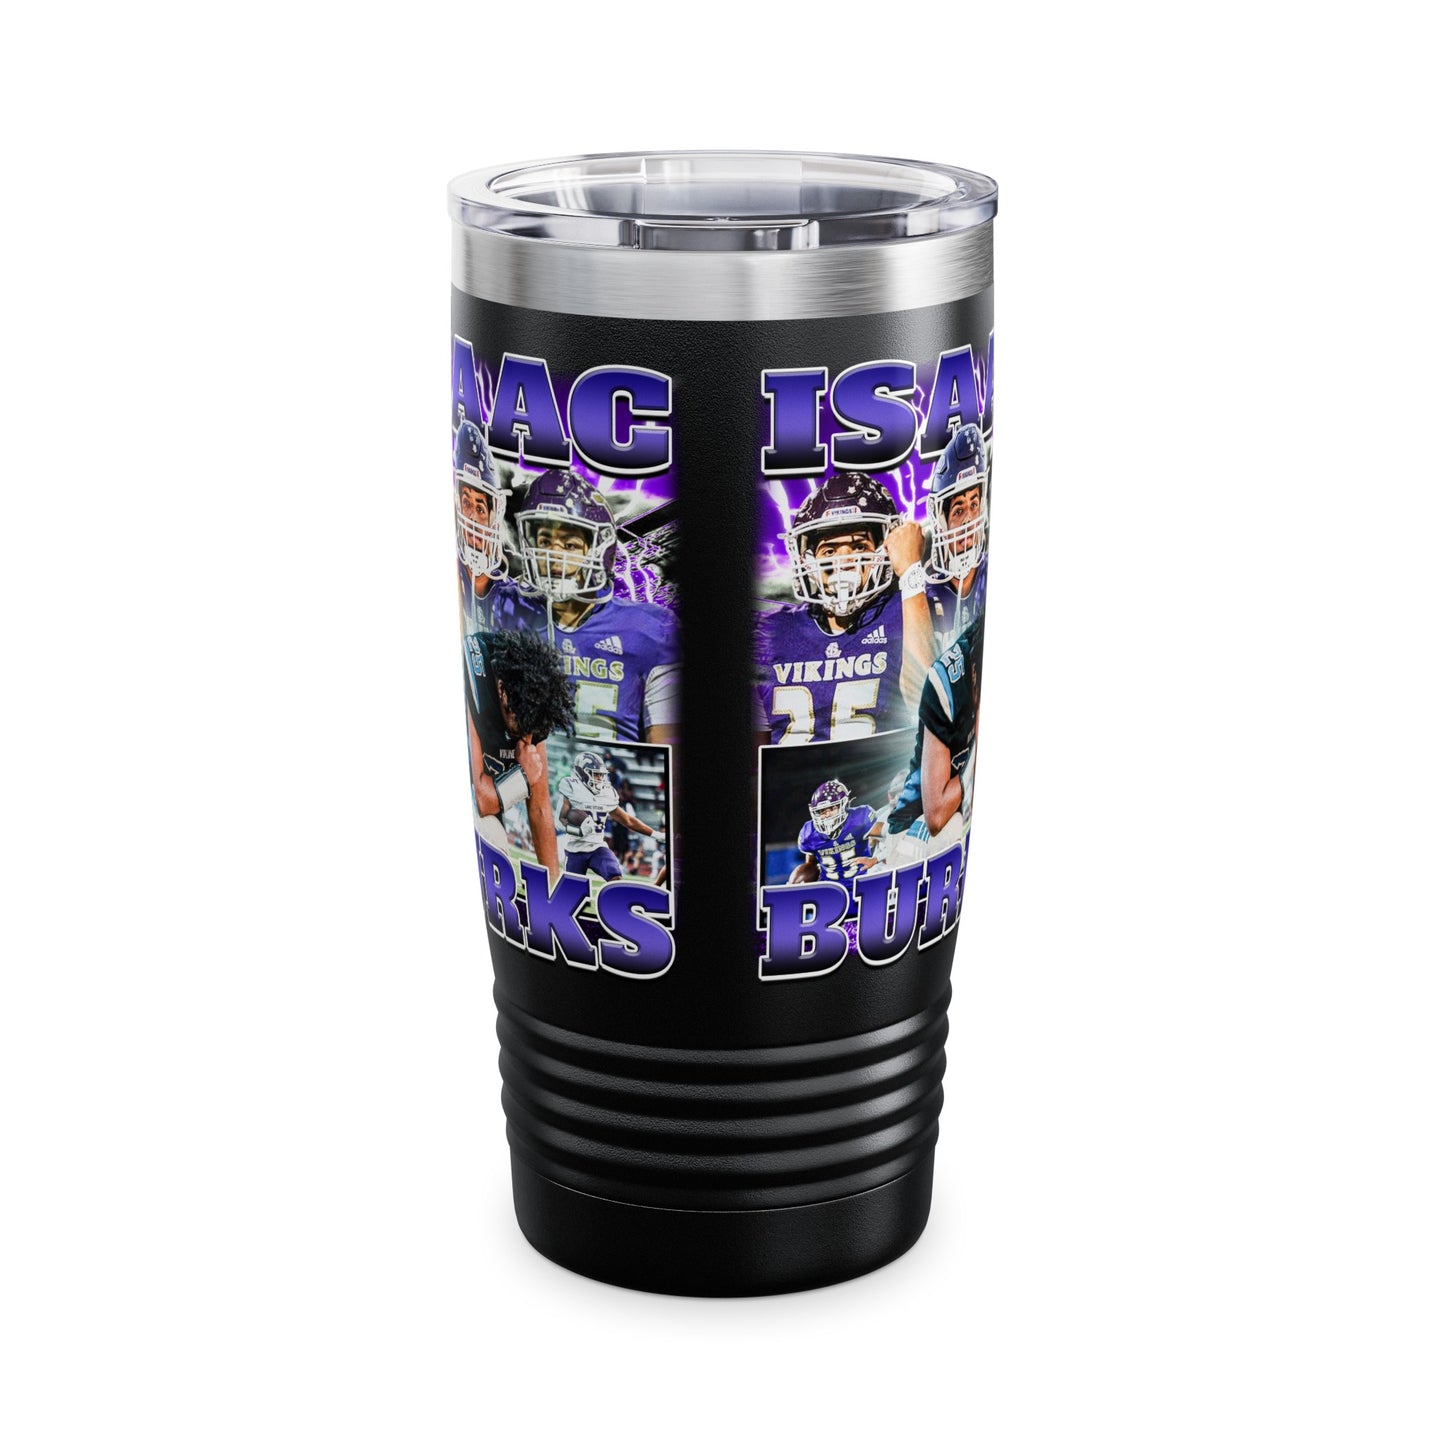 Isaac Burks Stainless Steal Tumbler